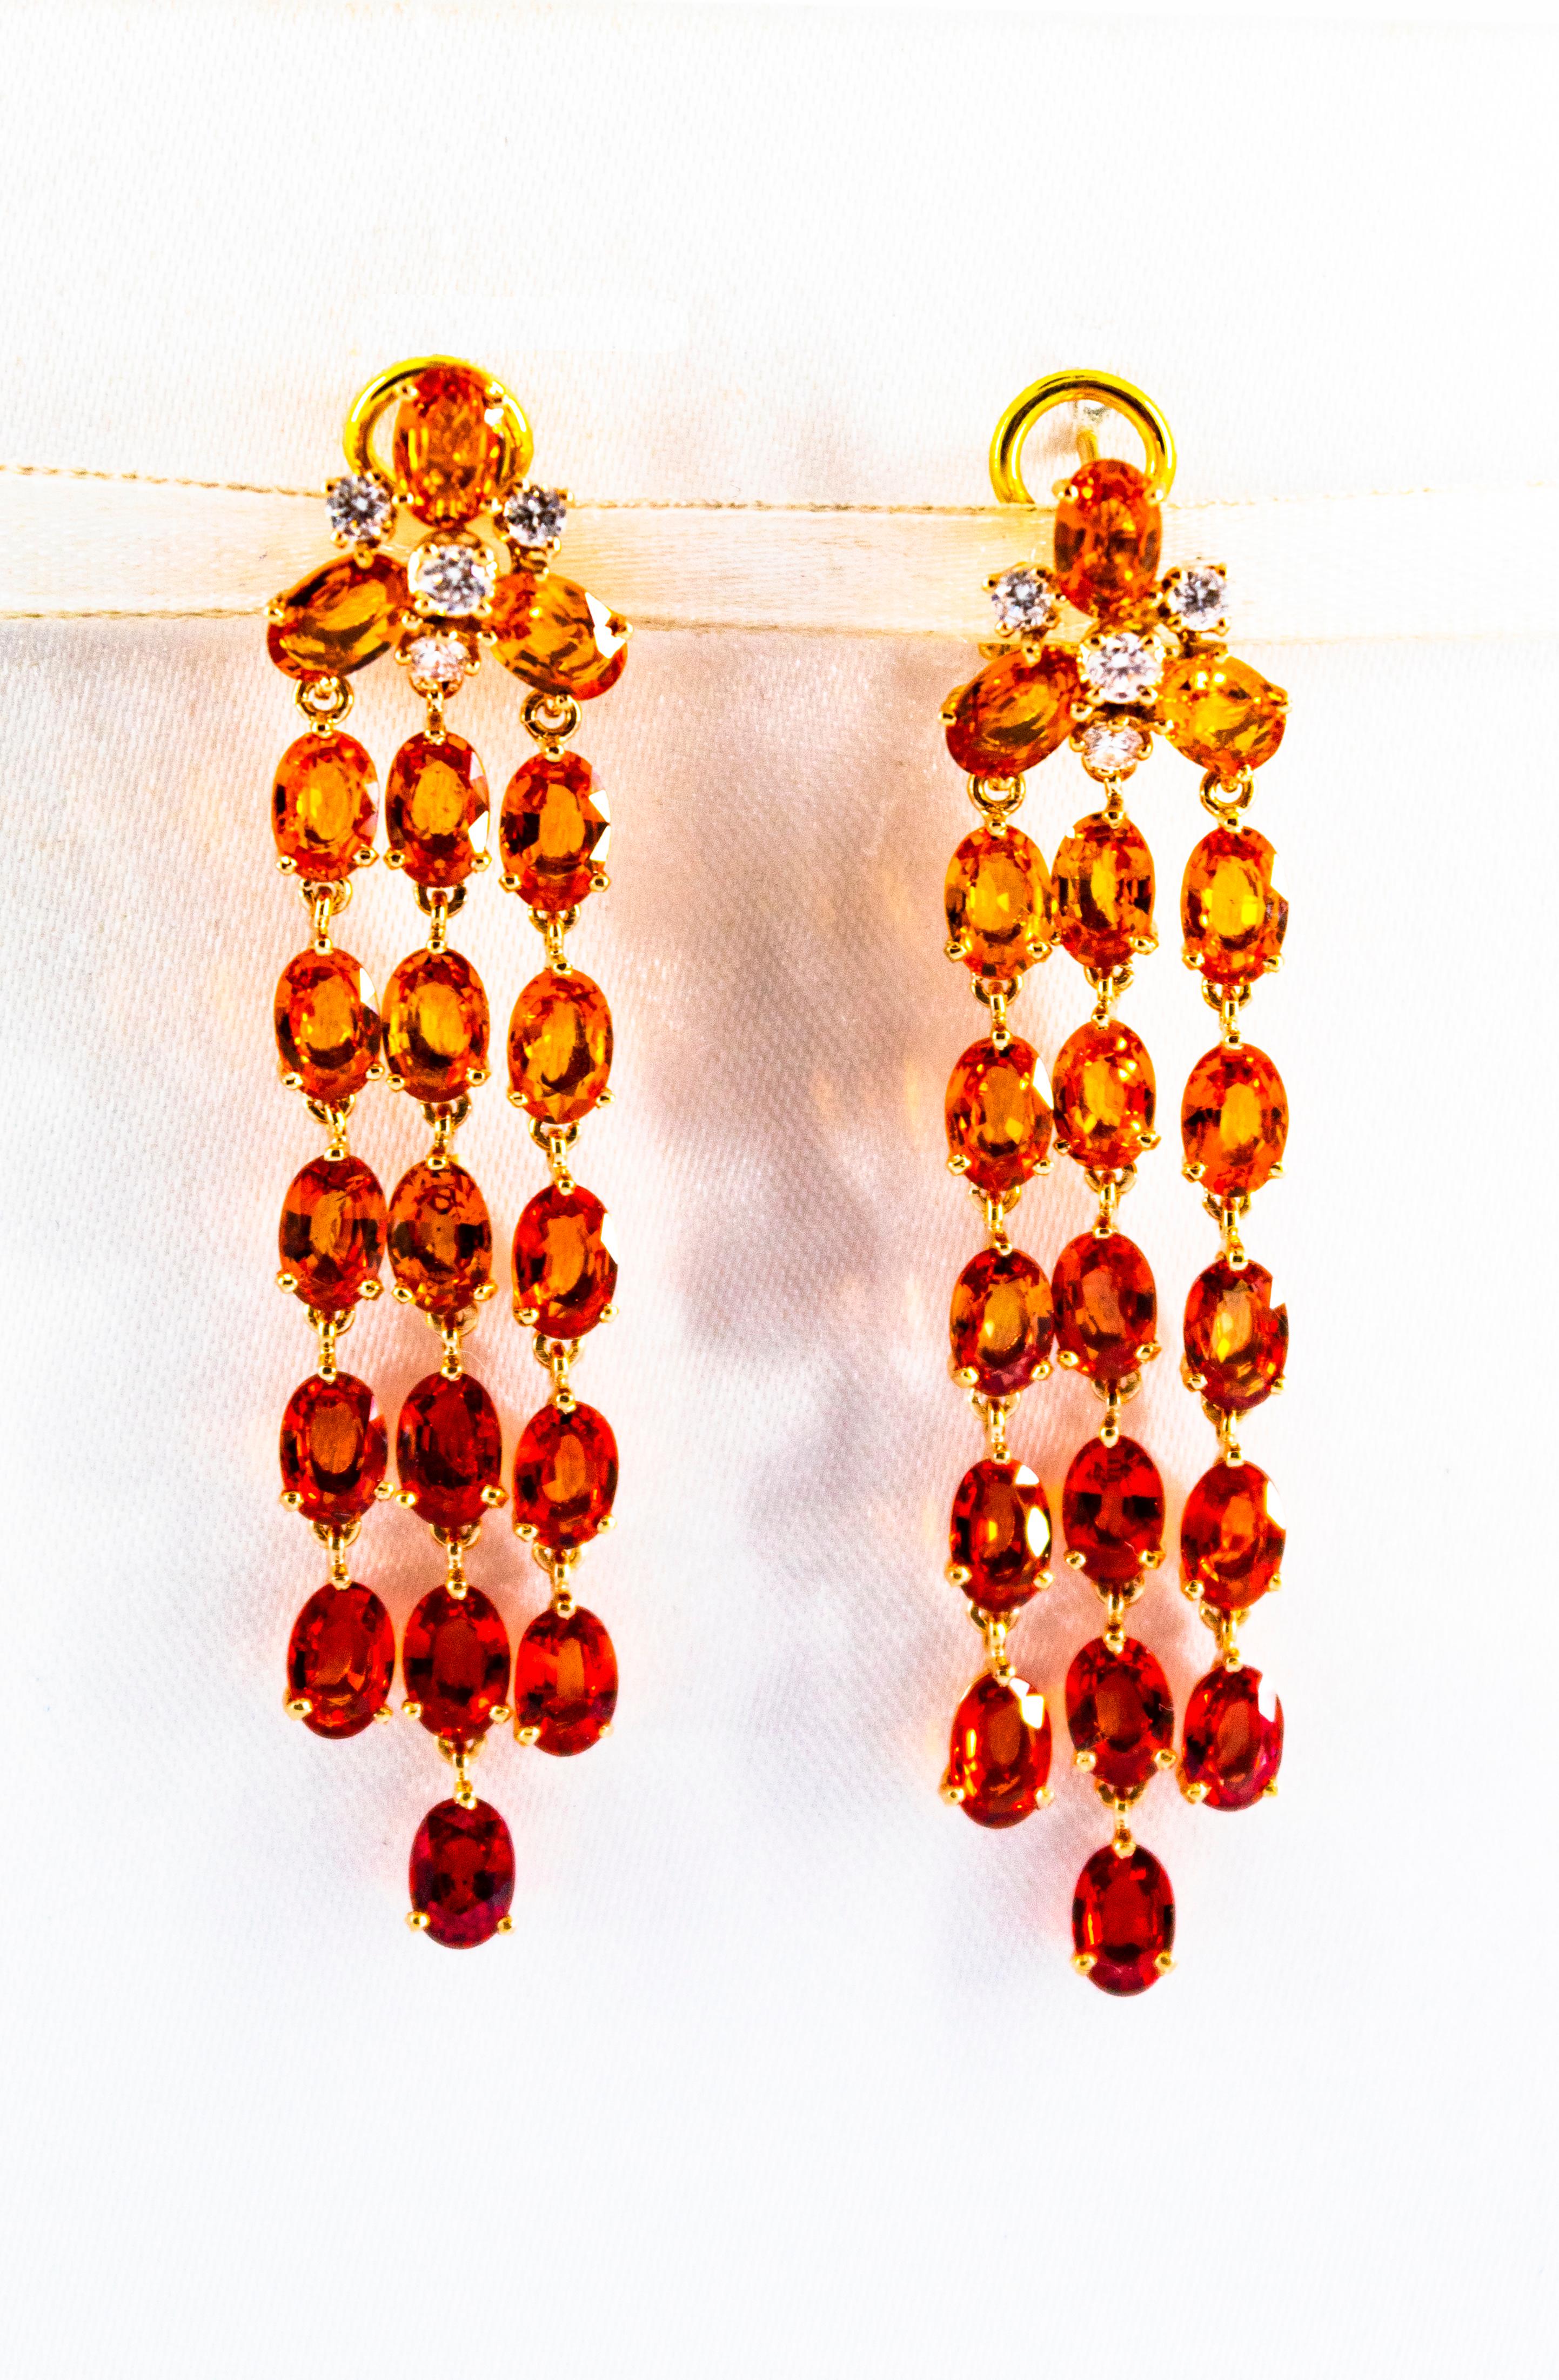 These Earrings are made of 14K Yellow Gold with 18K Yellow Gold Clips.
These Earrings have 0.45 Carats of White Diamonds.
These Earrings have 21.30 Carats of Yellow Sapphires.
These Yellow Sapphires create a waterfall that starts with an intense